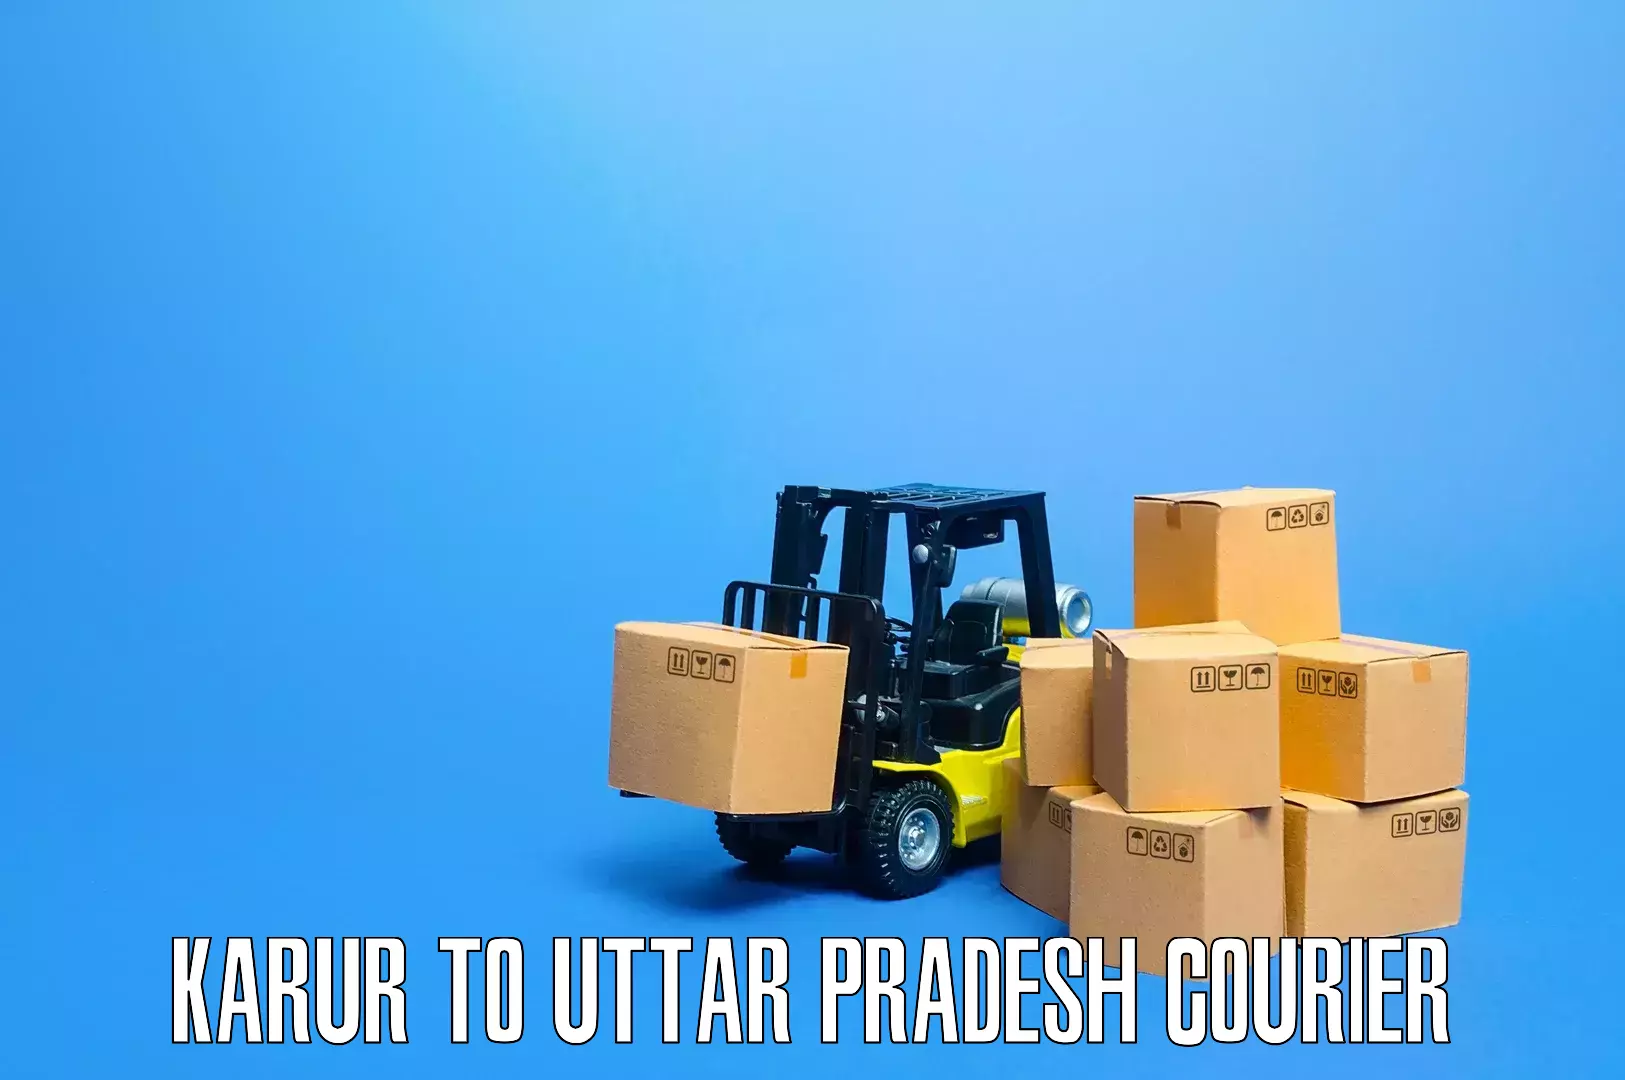 Quality relocation assistance Karur to Amethi